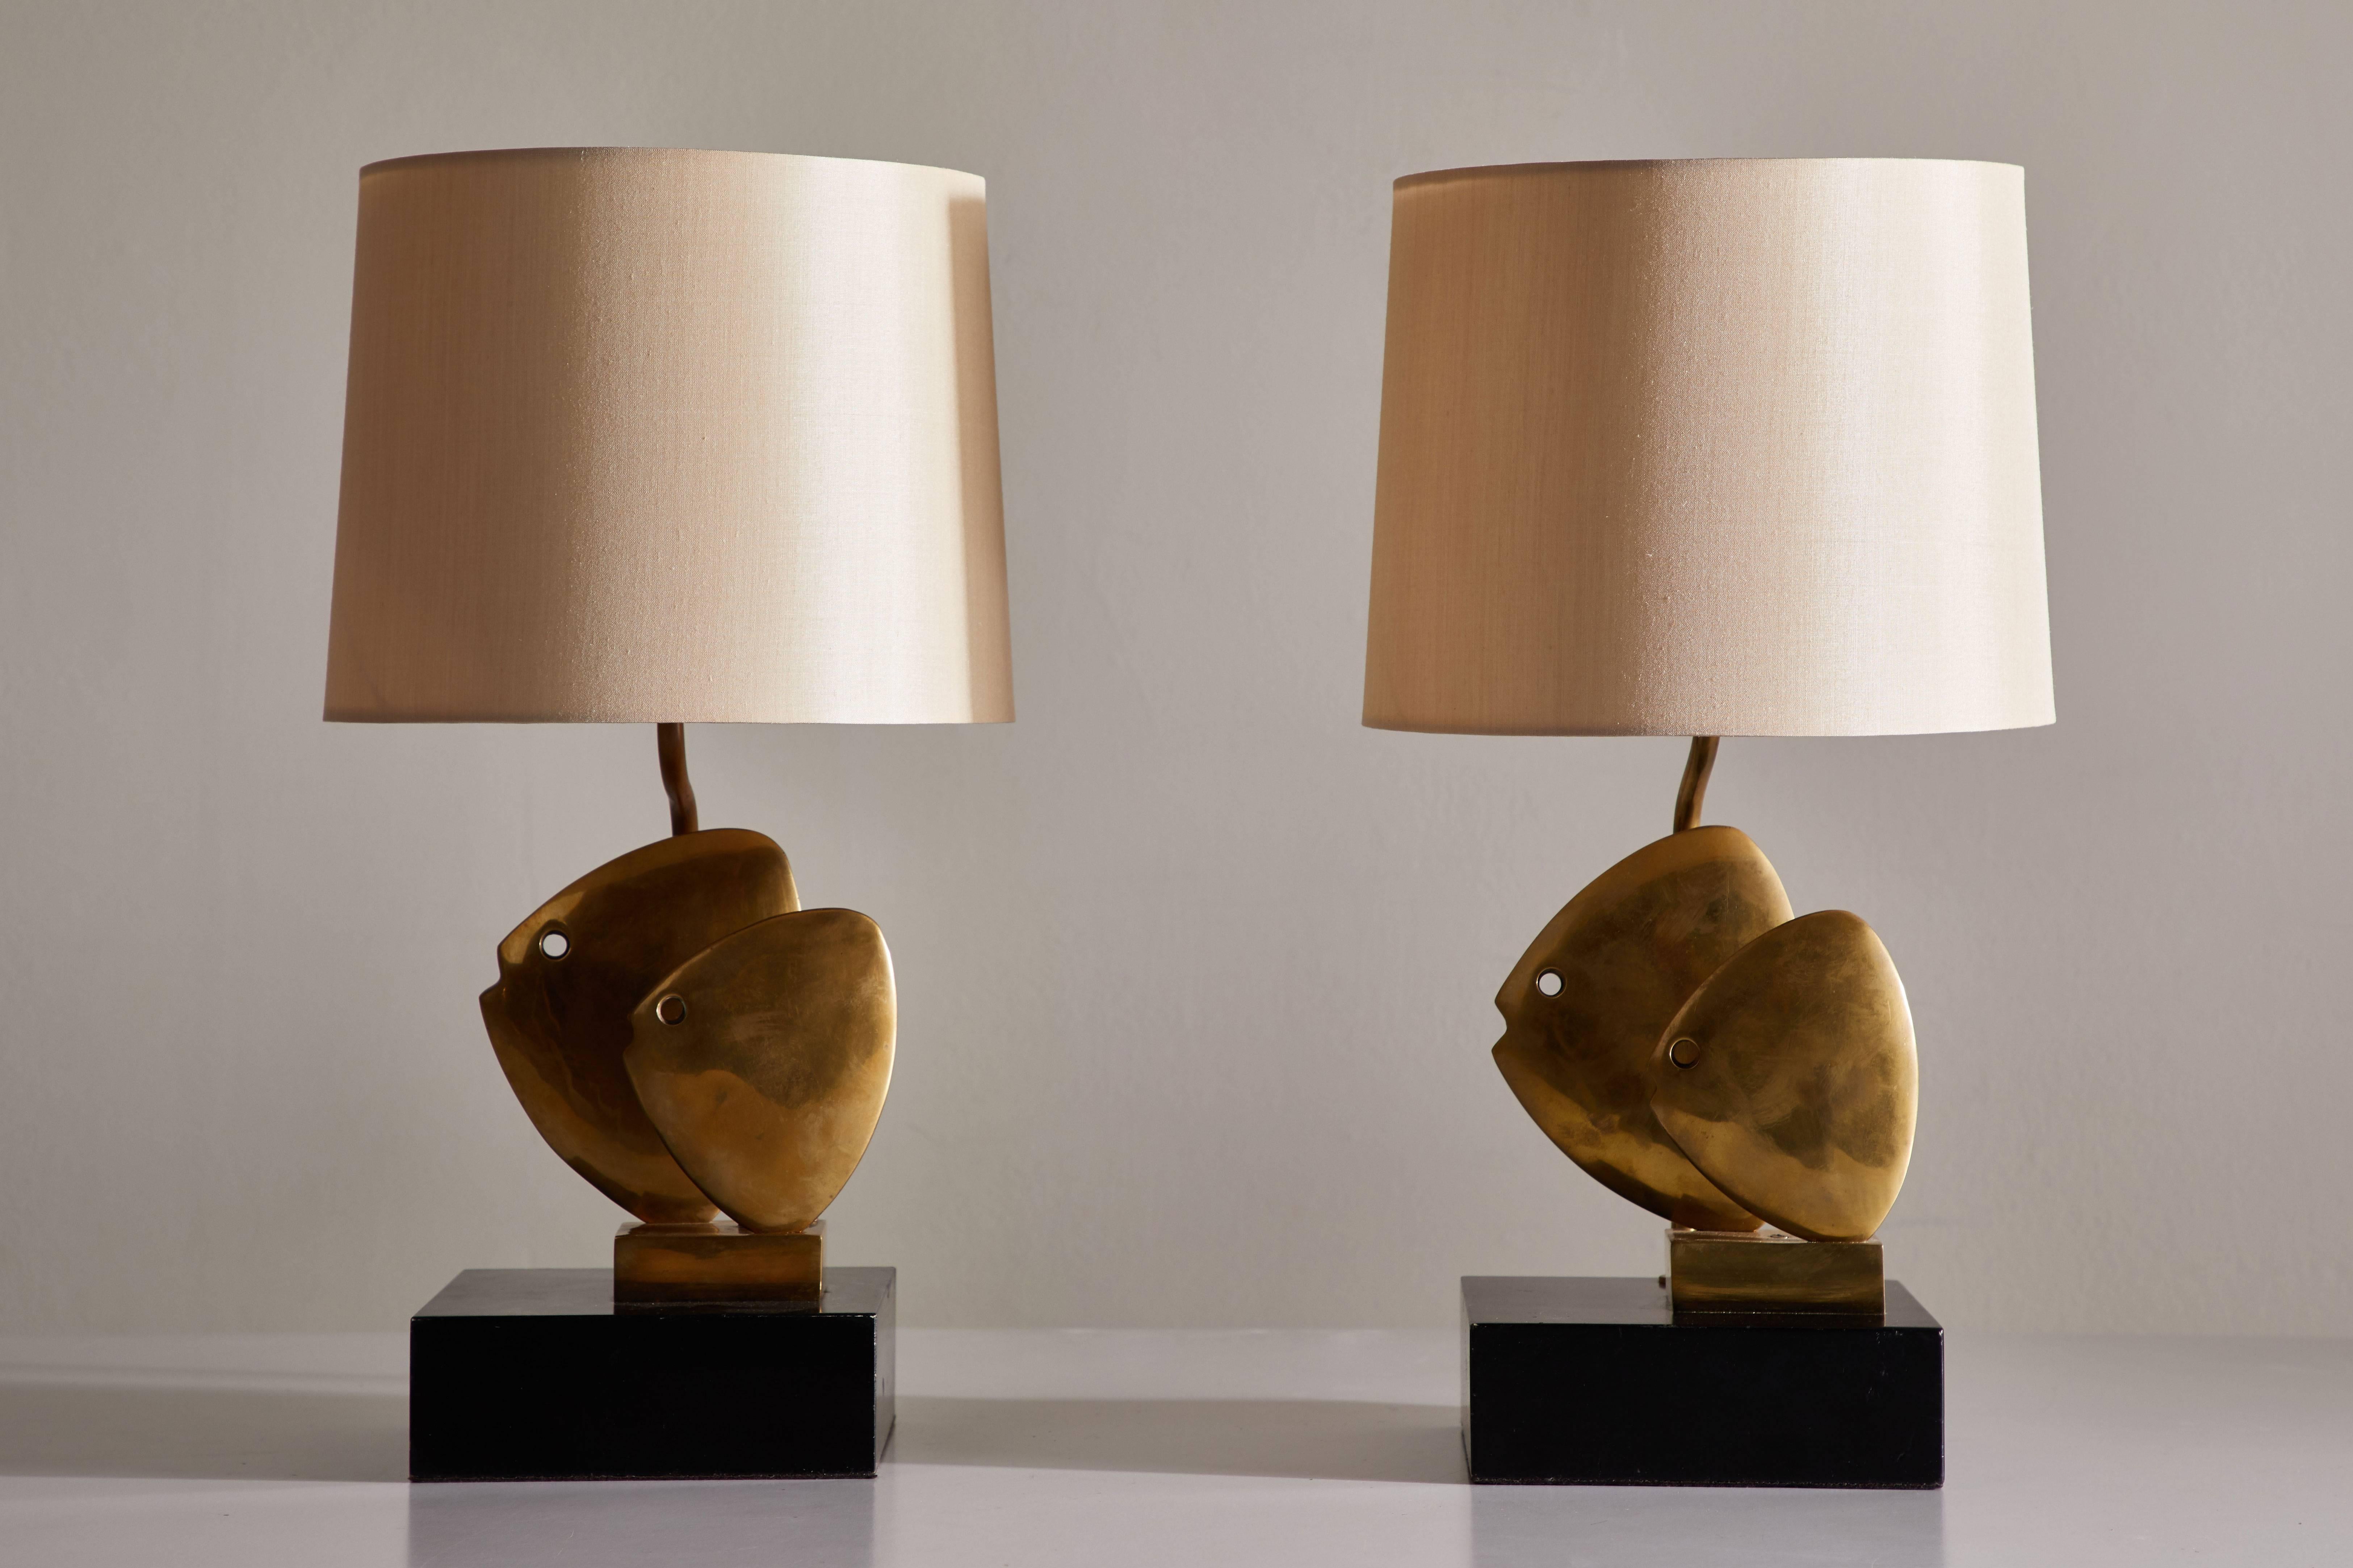 Pair of solid cast brass table lamps. Designed in France, circa 1970s. Solid cast brass-mounted to lacquered wood base. Custom silk shades included. Rewired with black French twist silk cord. Each light takes one E26 75w maximum bulb.